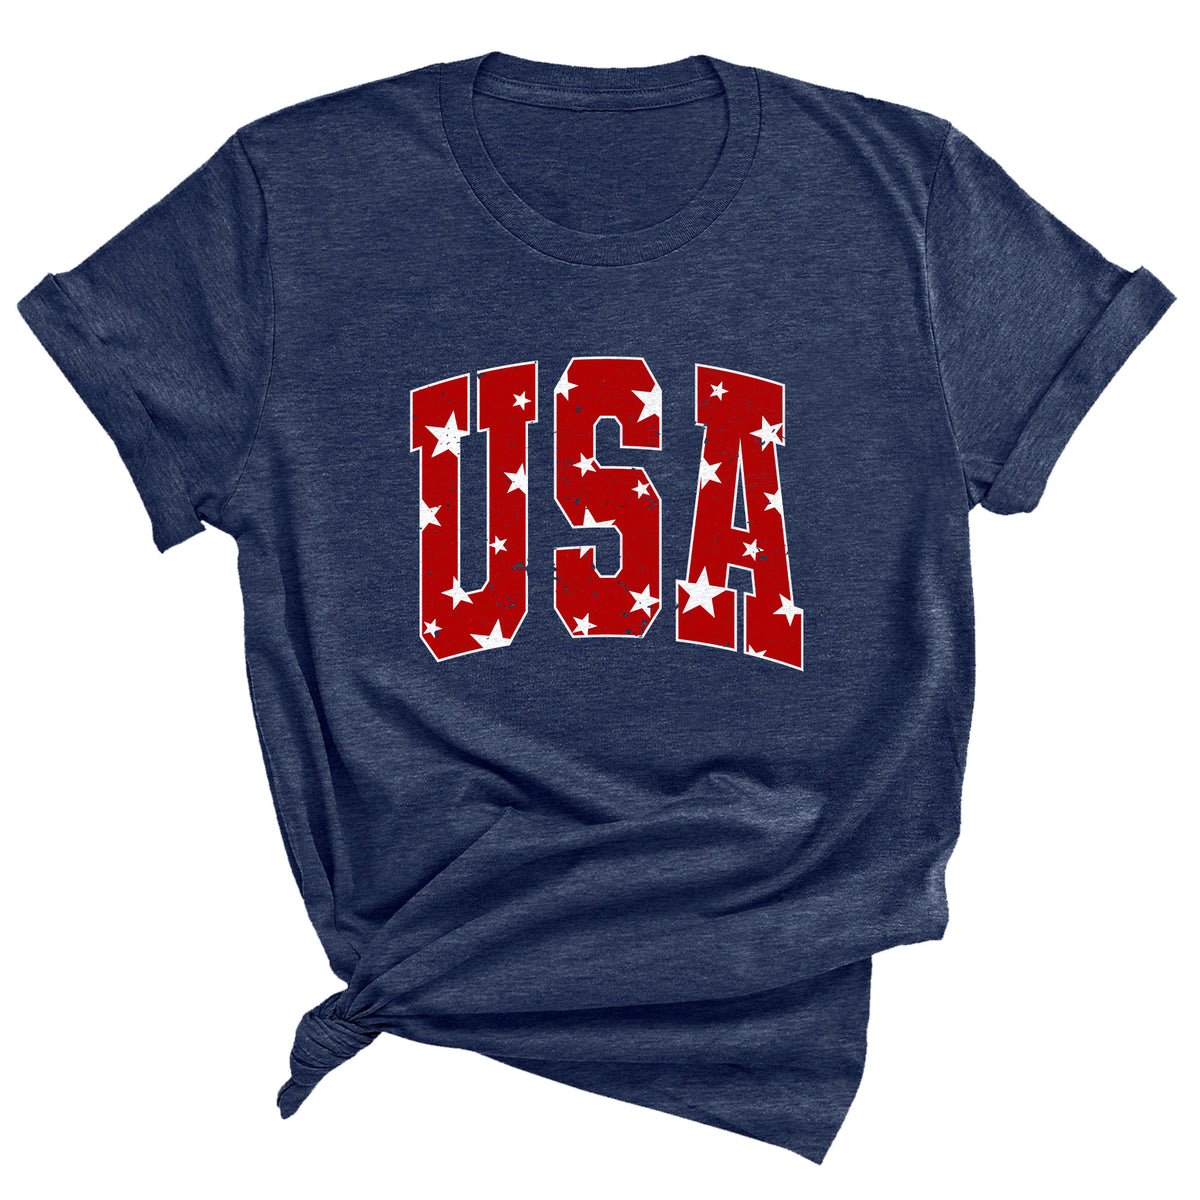 Distressed USA with Stars Unisex T-Shirt